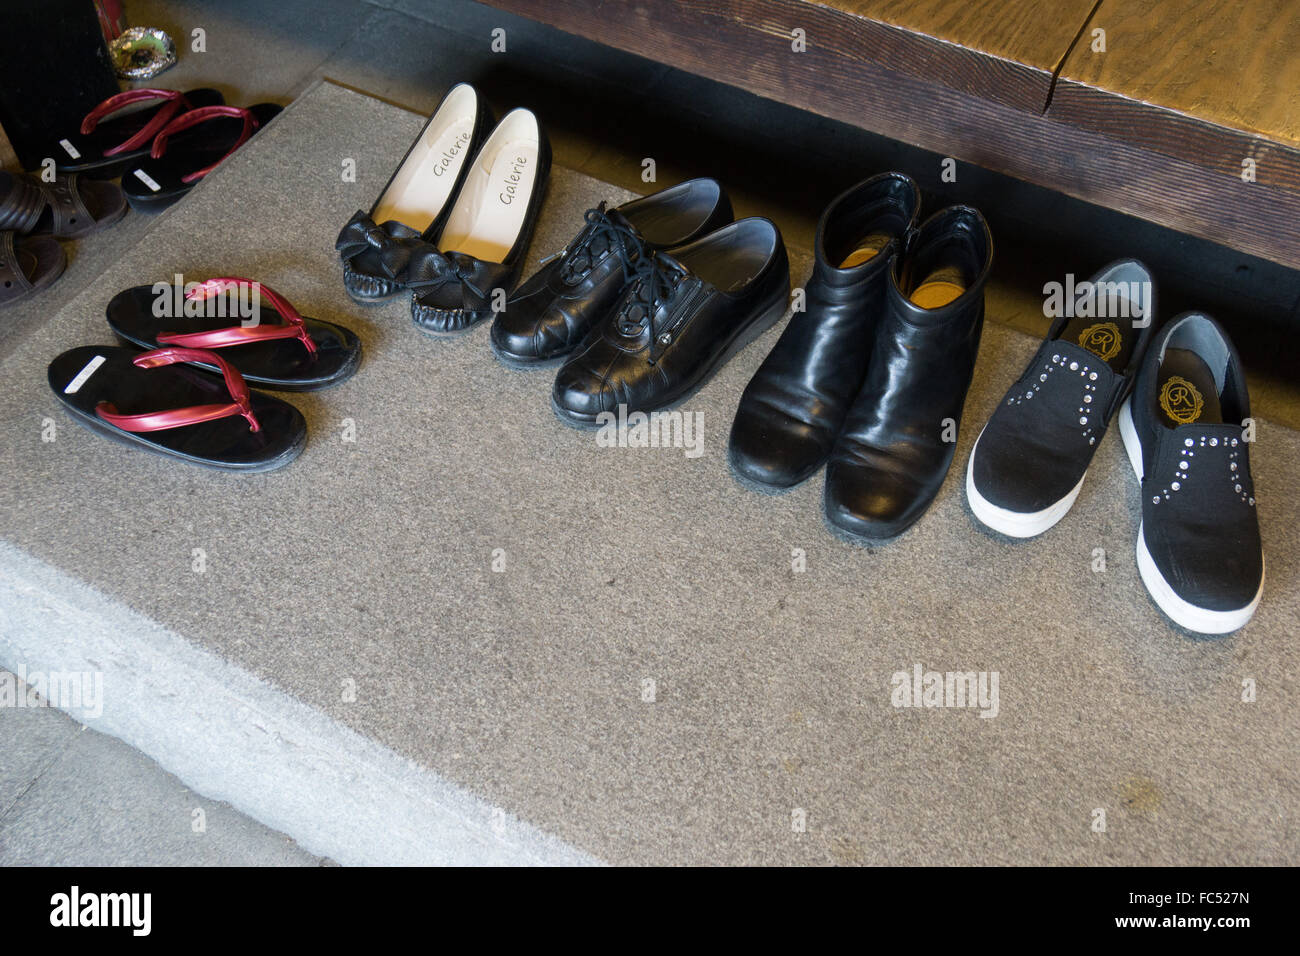 shoes at a restaurant in Japan Stock Photo